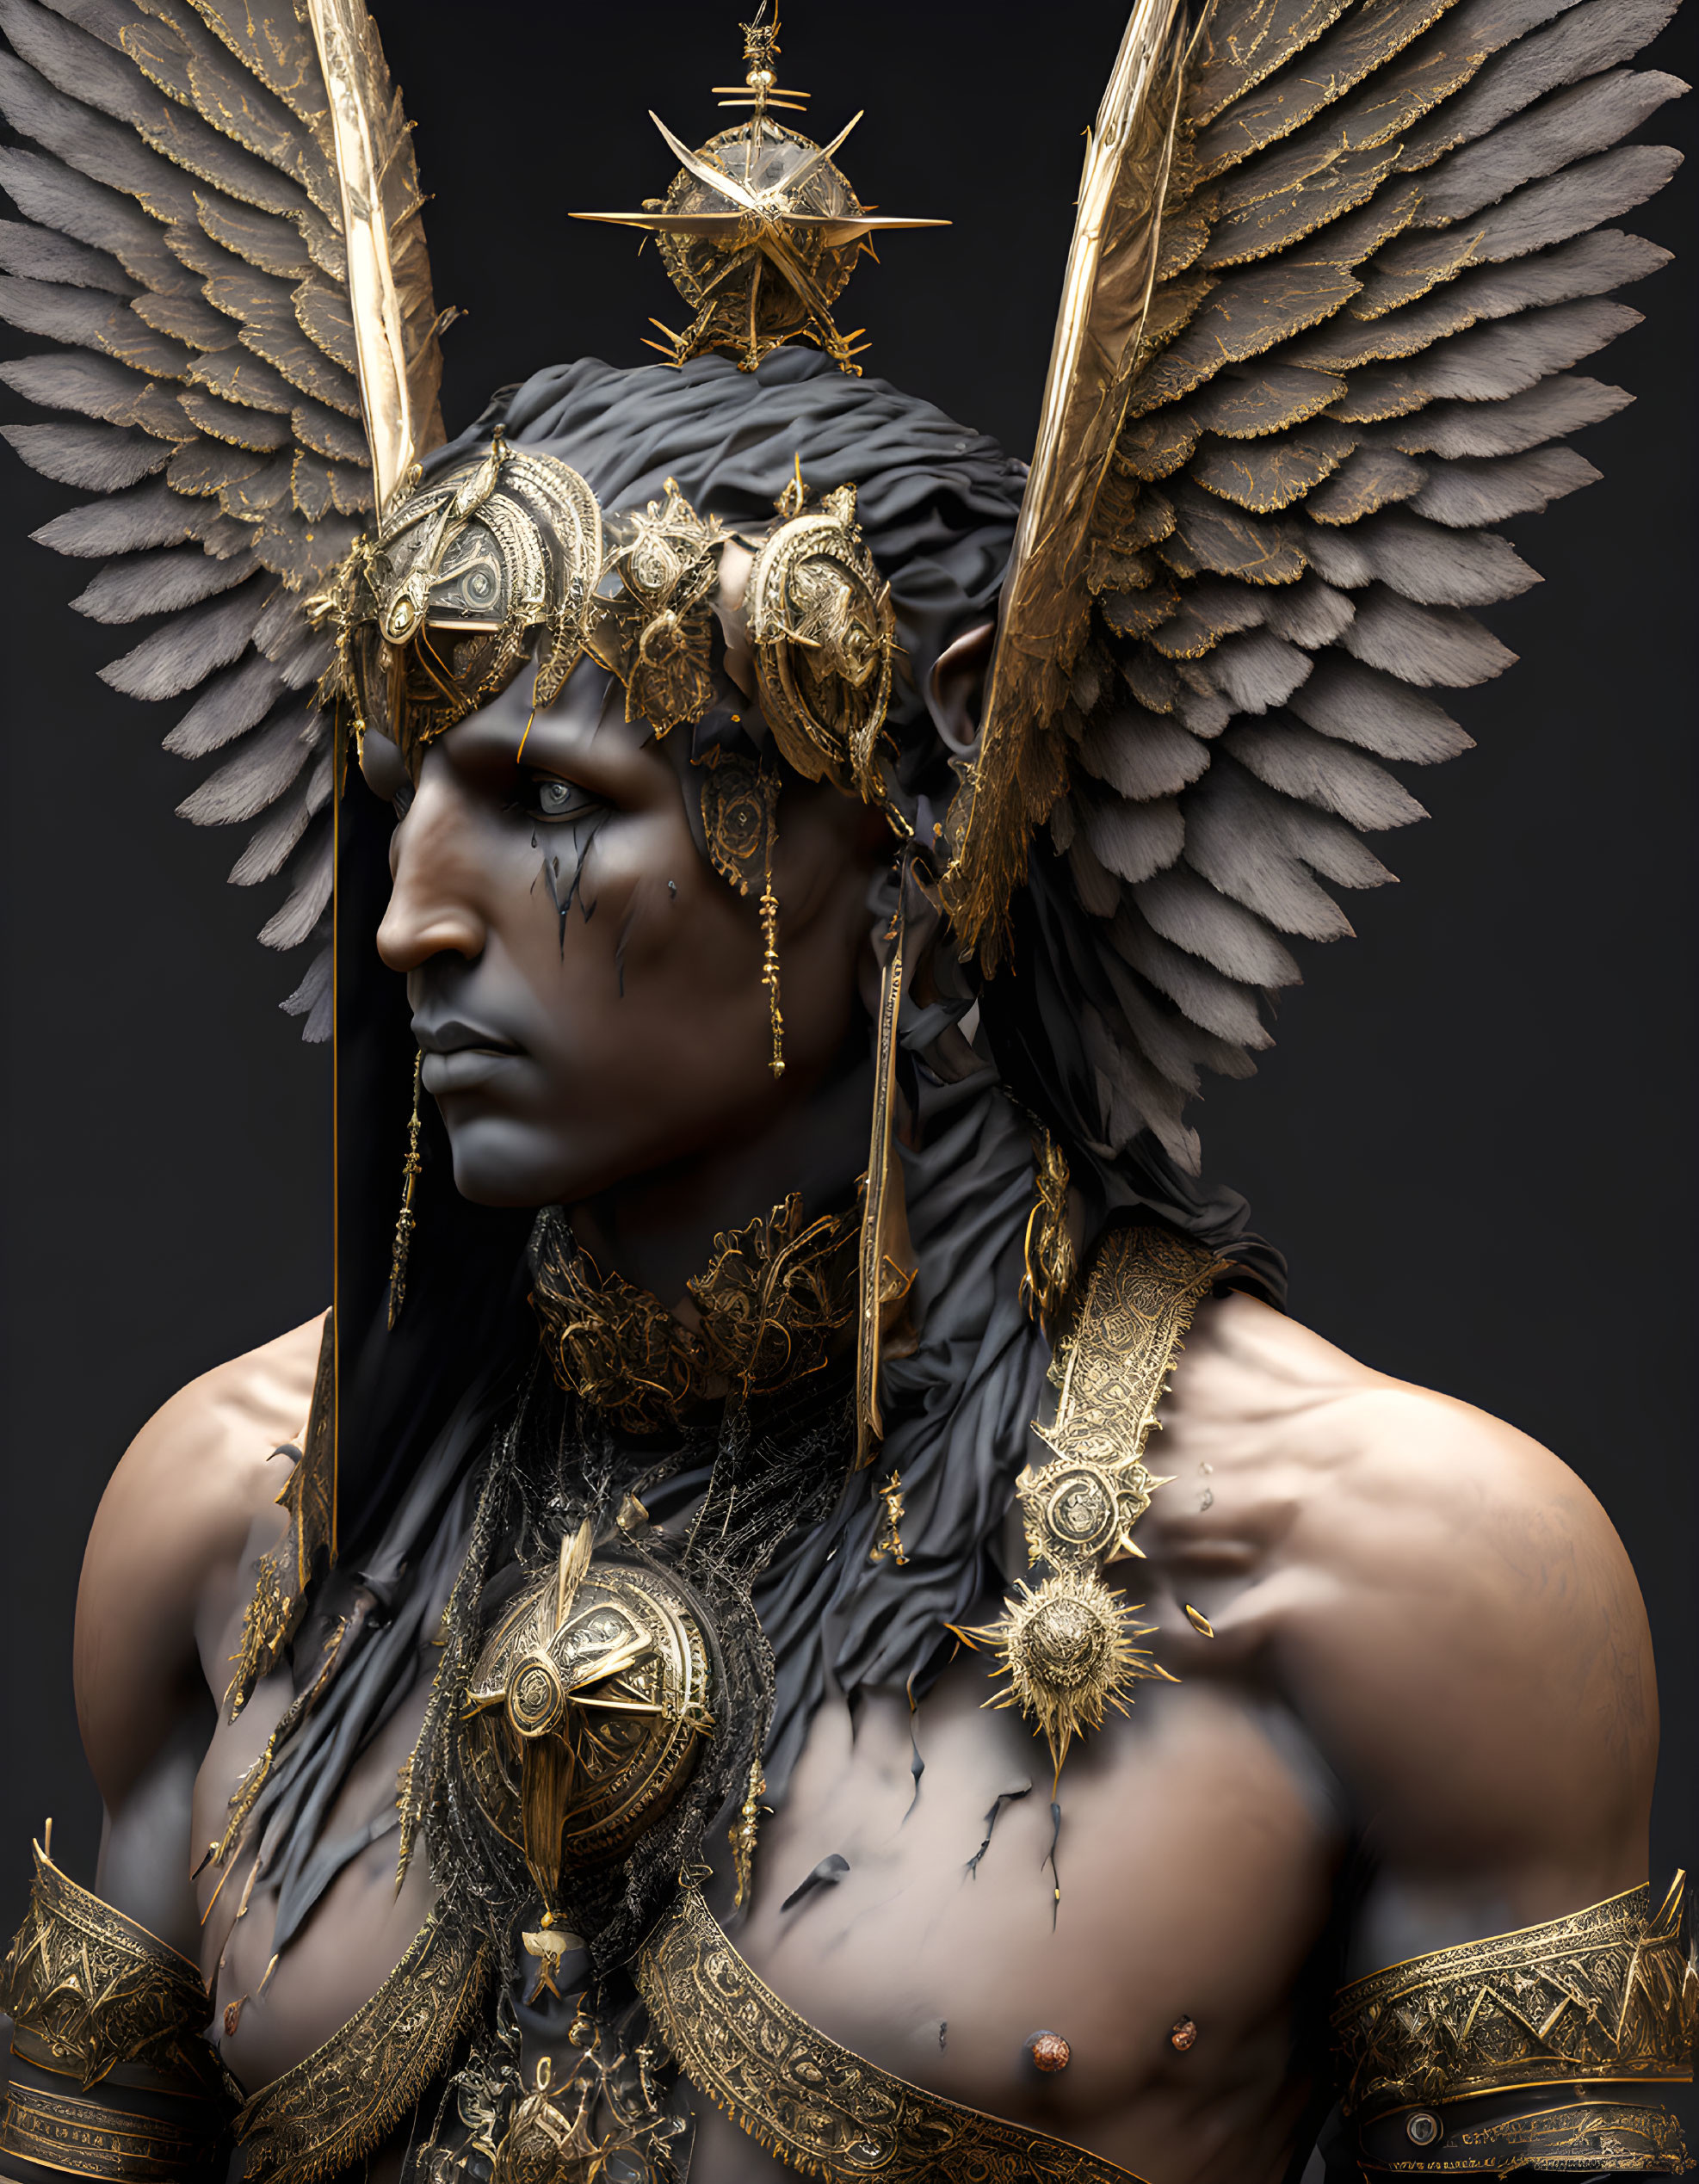 Digital artwork of person in golden headdress and armor with feathered wings